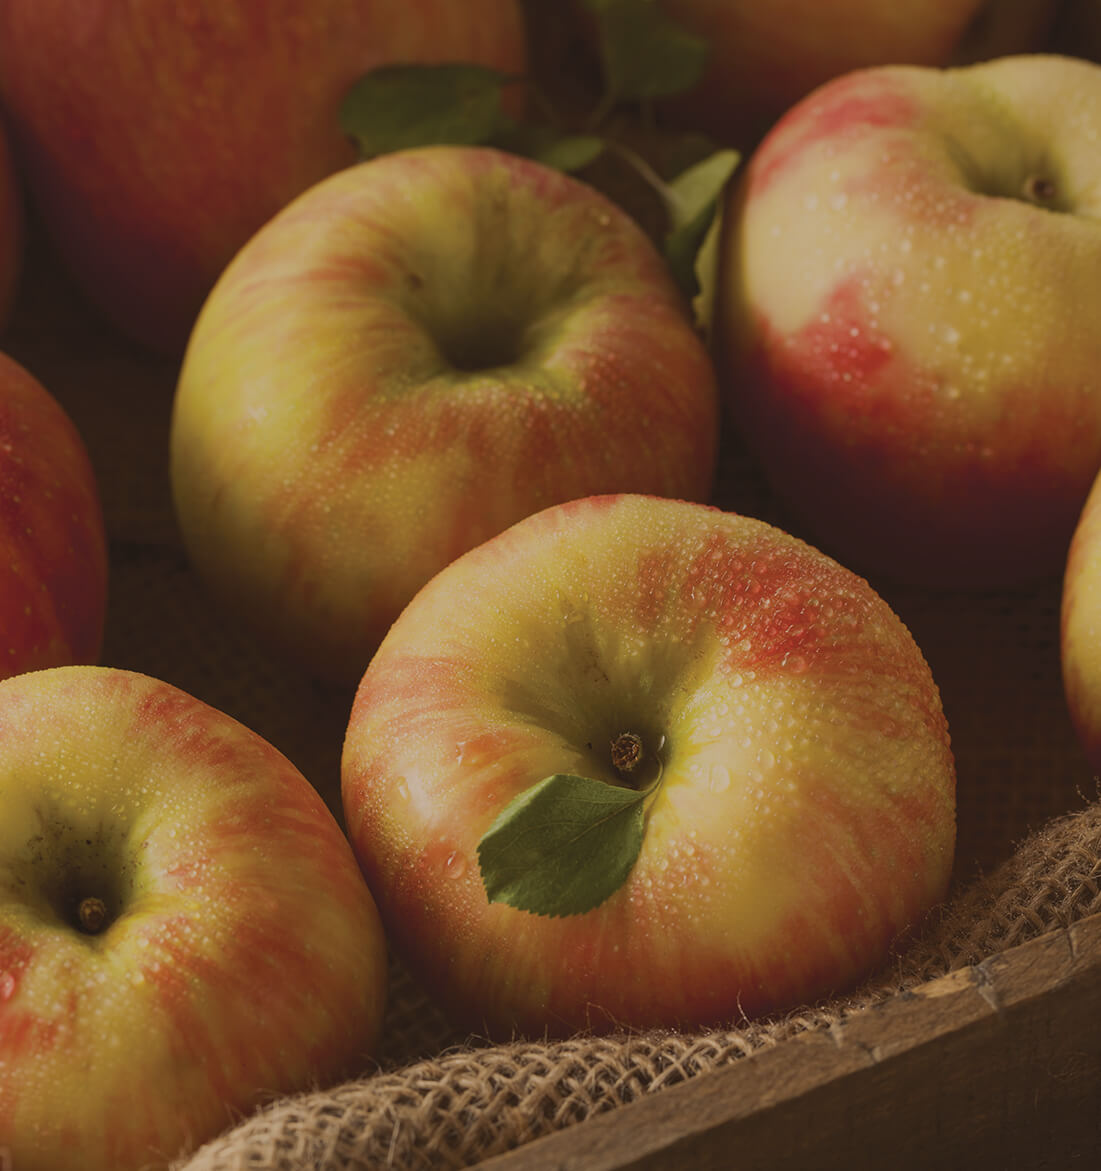 https://www.plymouthorchards.com/wp-content/uploads/2018/07/product-lead-ins-large-organic-apples.jpg